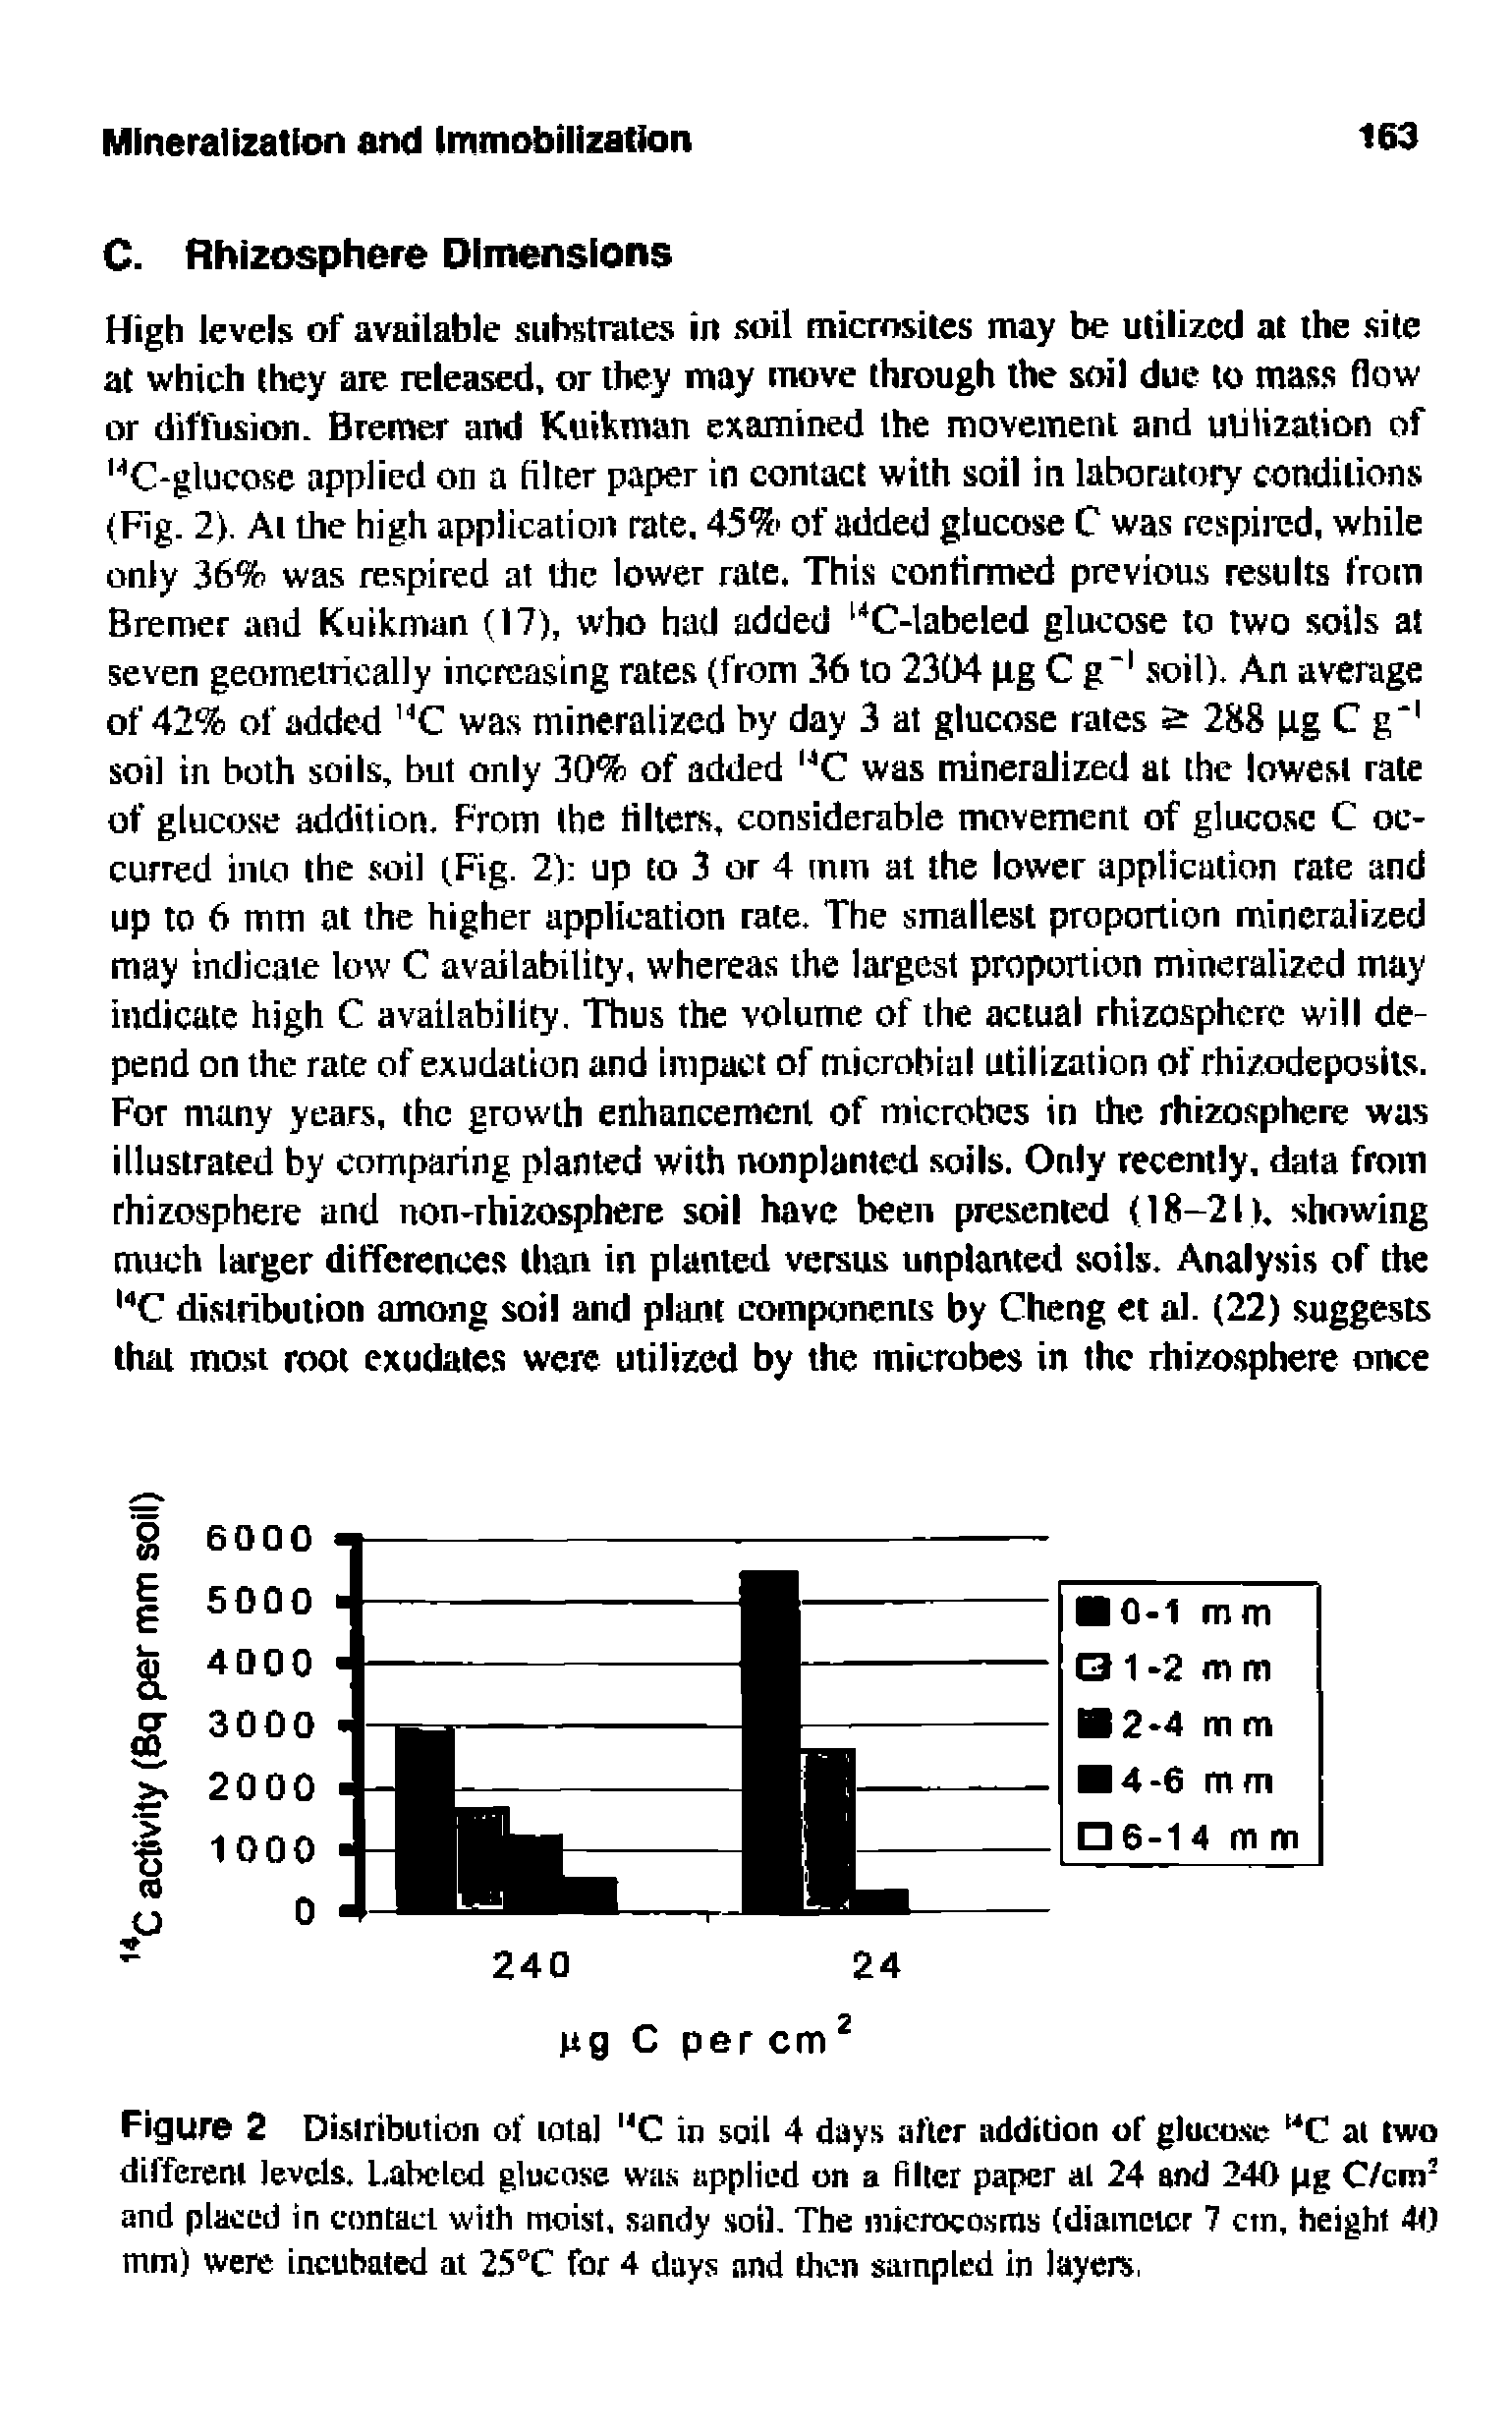 Figure 2 Distribution of iota) "C in soil 4 days after addition of glucose C at two different levels. Labeled glucose was applied on a filter paper al 24 and 240 pg C/cm and placed in contact with moist, sandy soil. The microcosms (diamcior 7 ctn, height 40 mm) were incubated at 25 C for 4 days and then sampled in layers,...